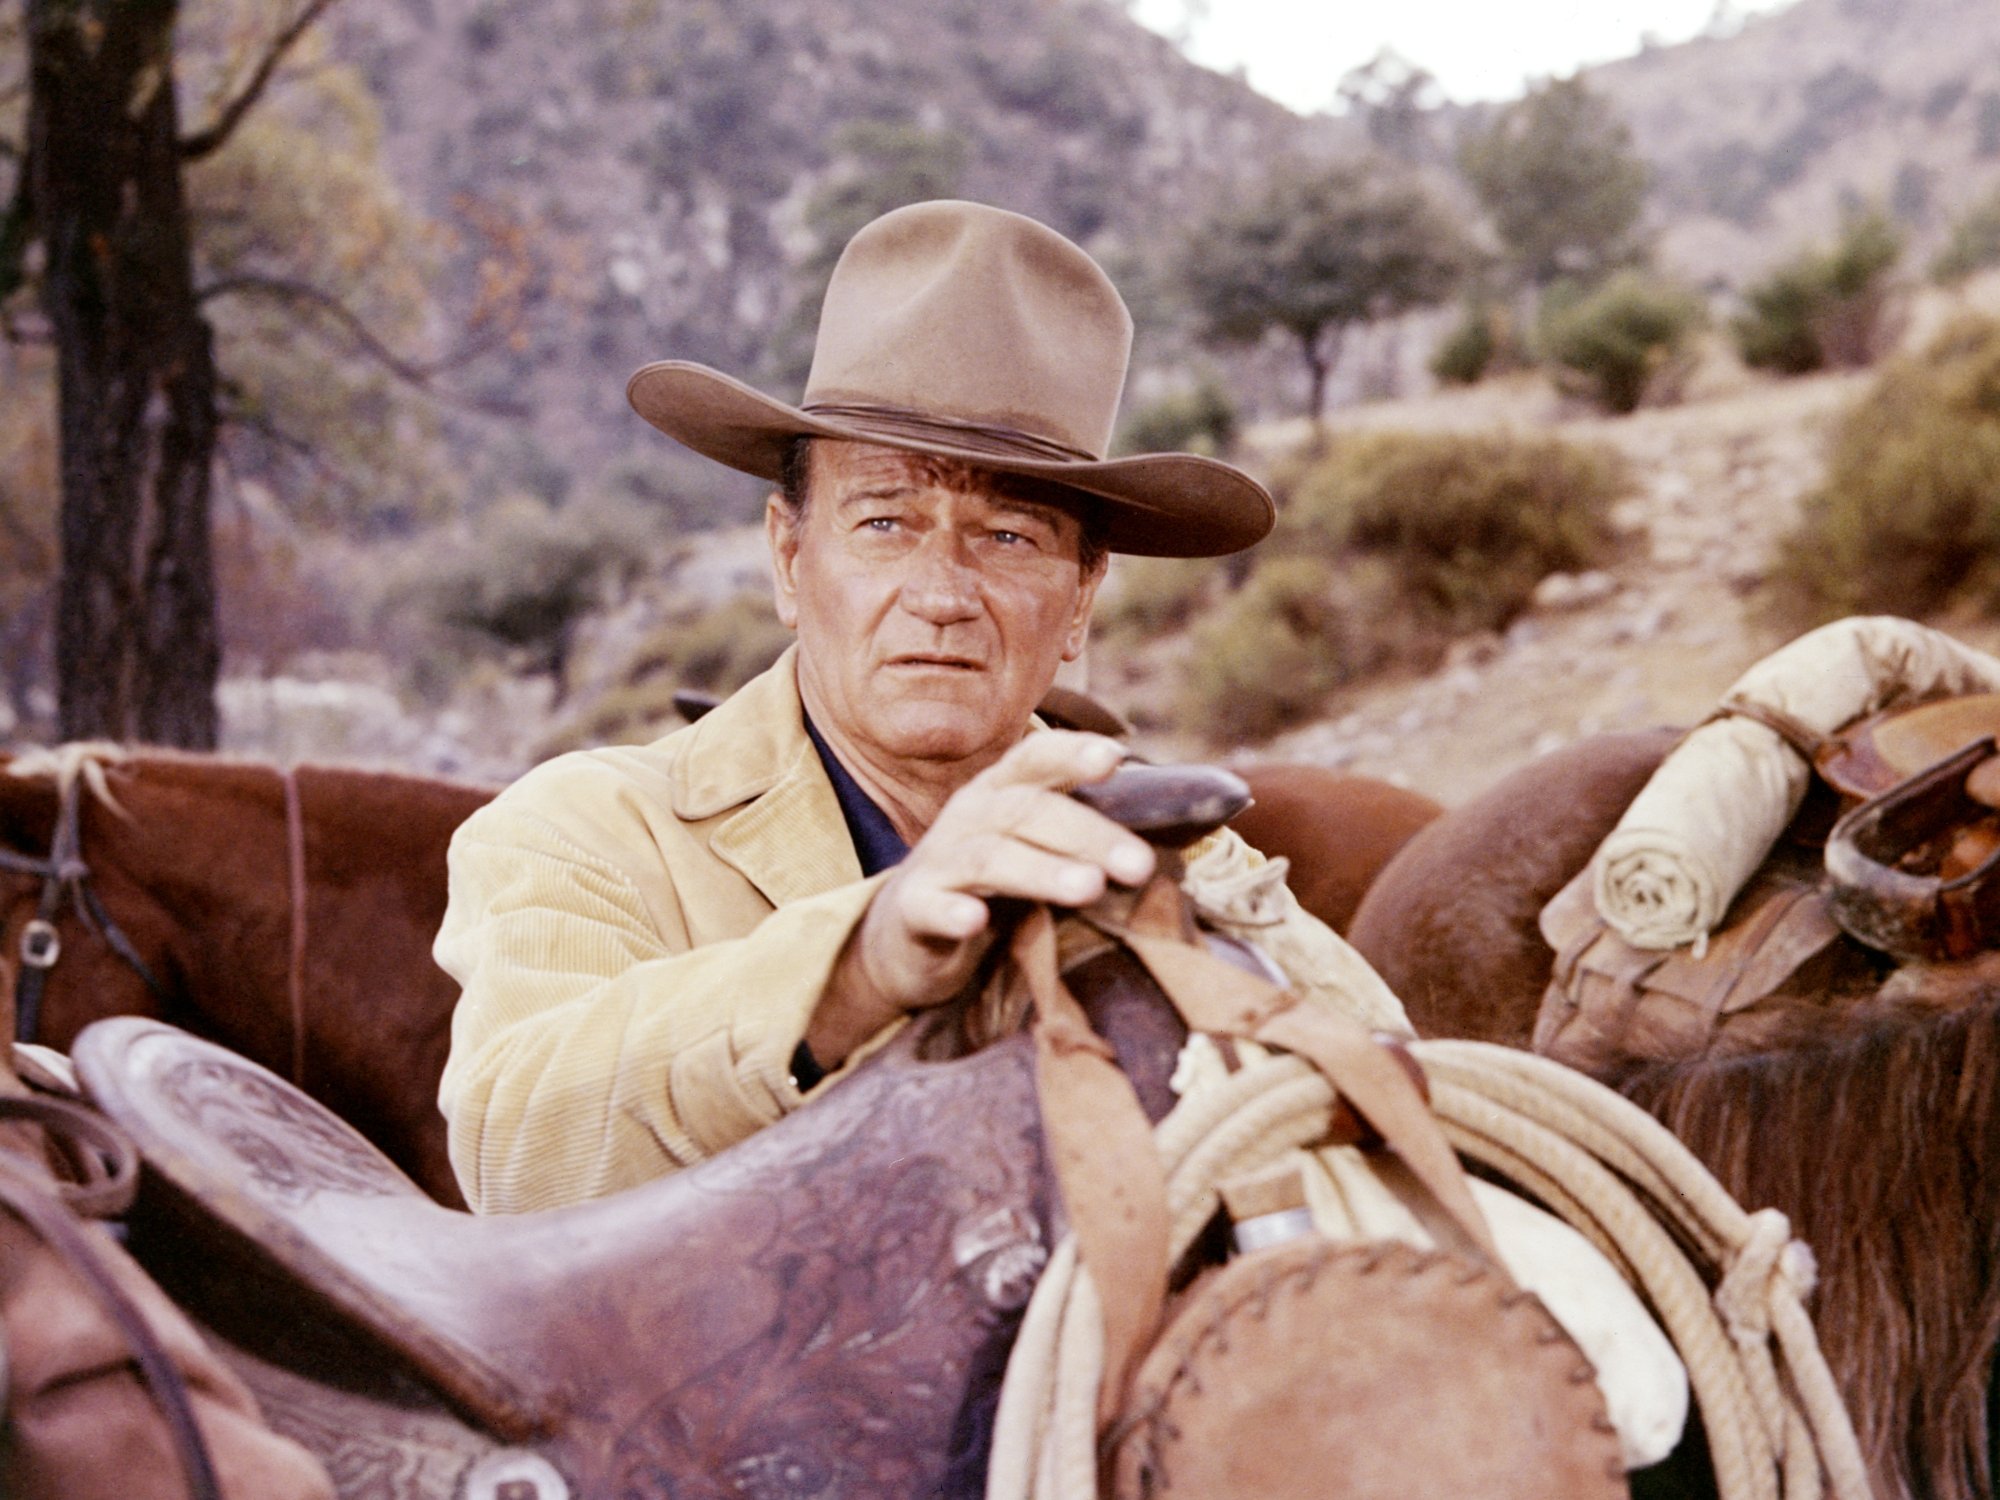 'The Sons of Katie Elder' John Wayne as John wearing a cowboy hat with a hand on the saddle with the hills in the background